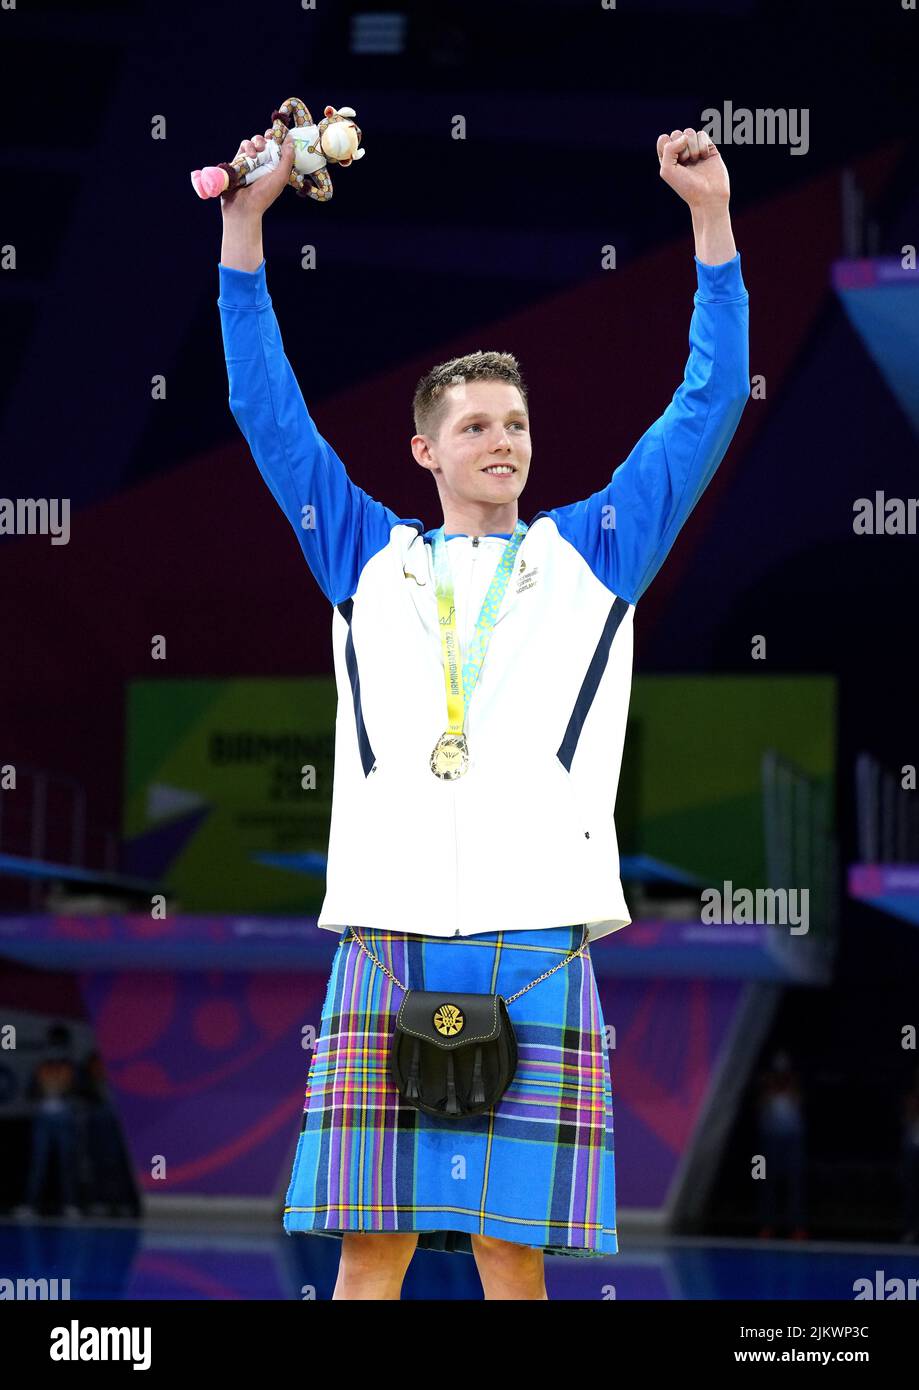 Scotland's Duncan Scott with the gold medal after winning the Men's 200m Individual Medley Final at the Sandwell Aquatics Centre on day six of the 2022 Commonwealth Games in Birmingham. Picture date: Wednesday August 3, 2022. Stock Photo